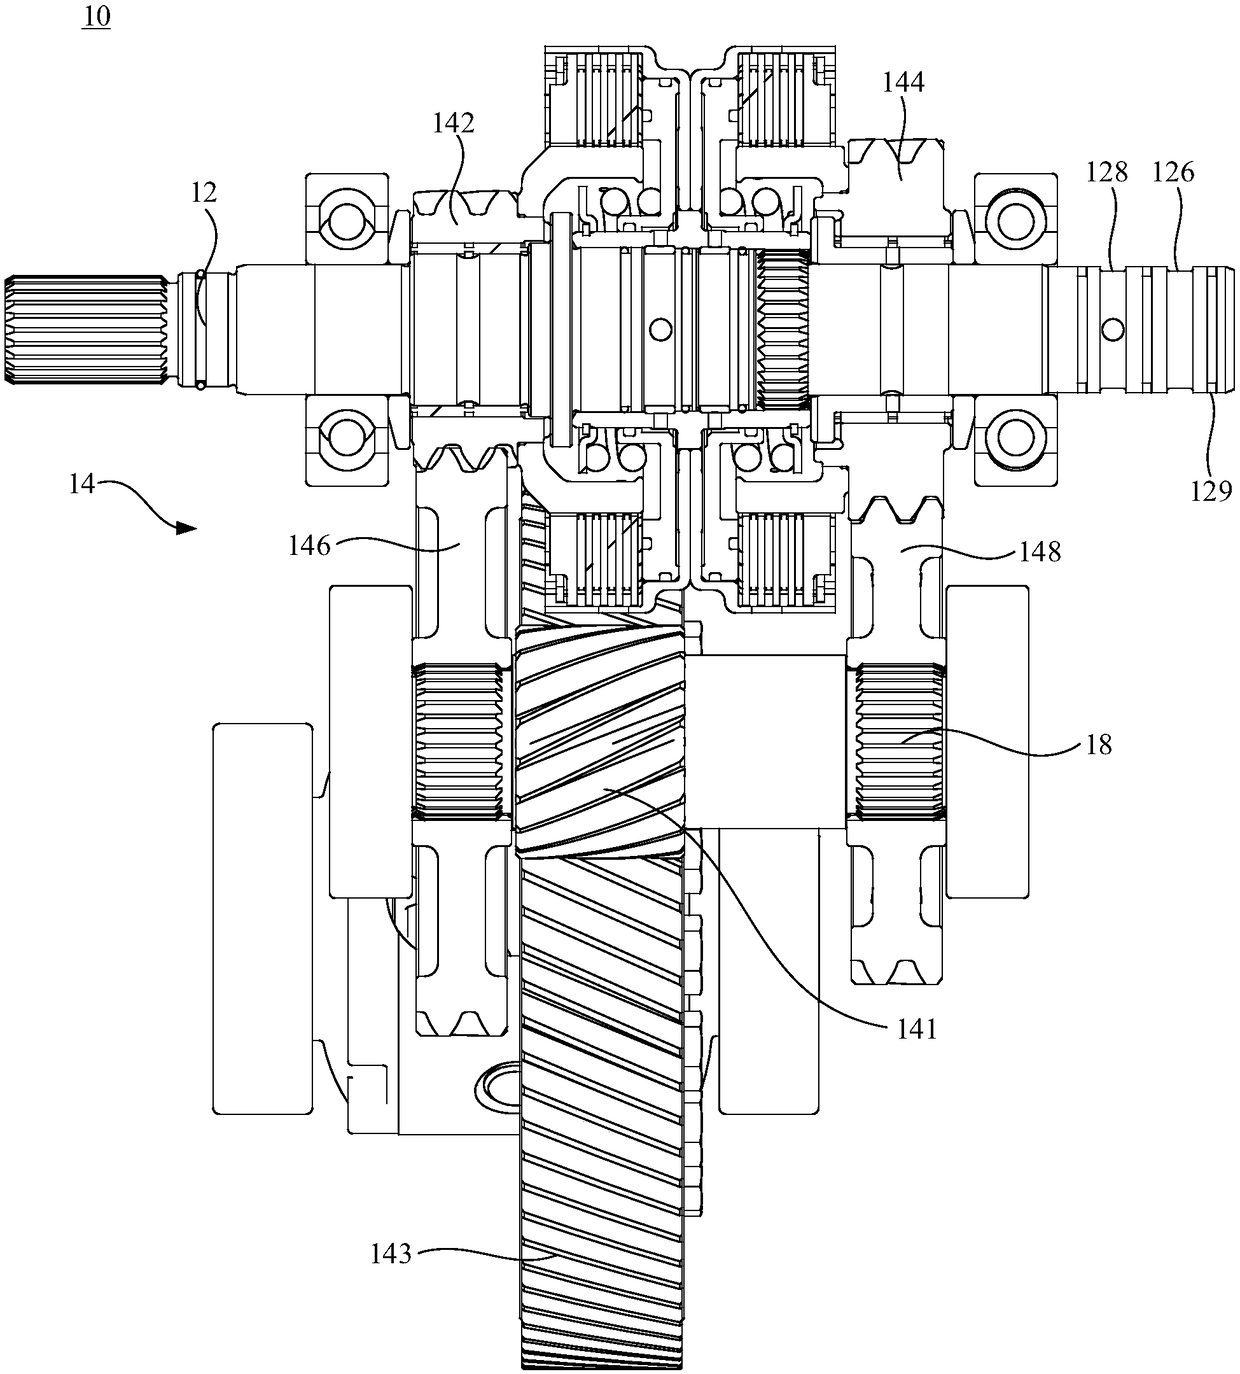 Transmission and electric vehicle